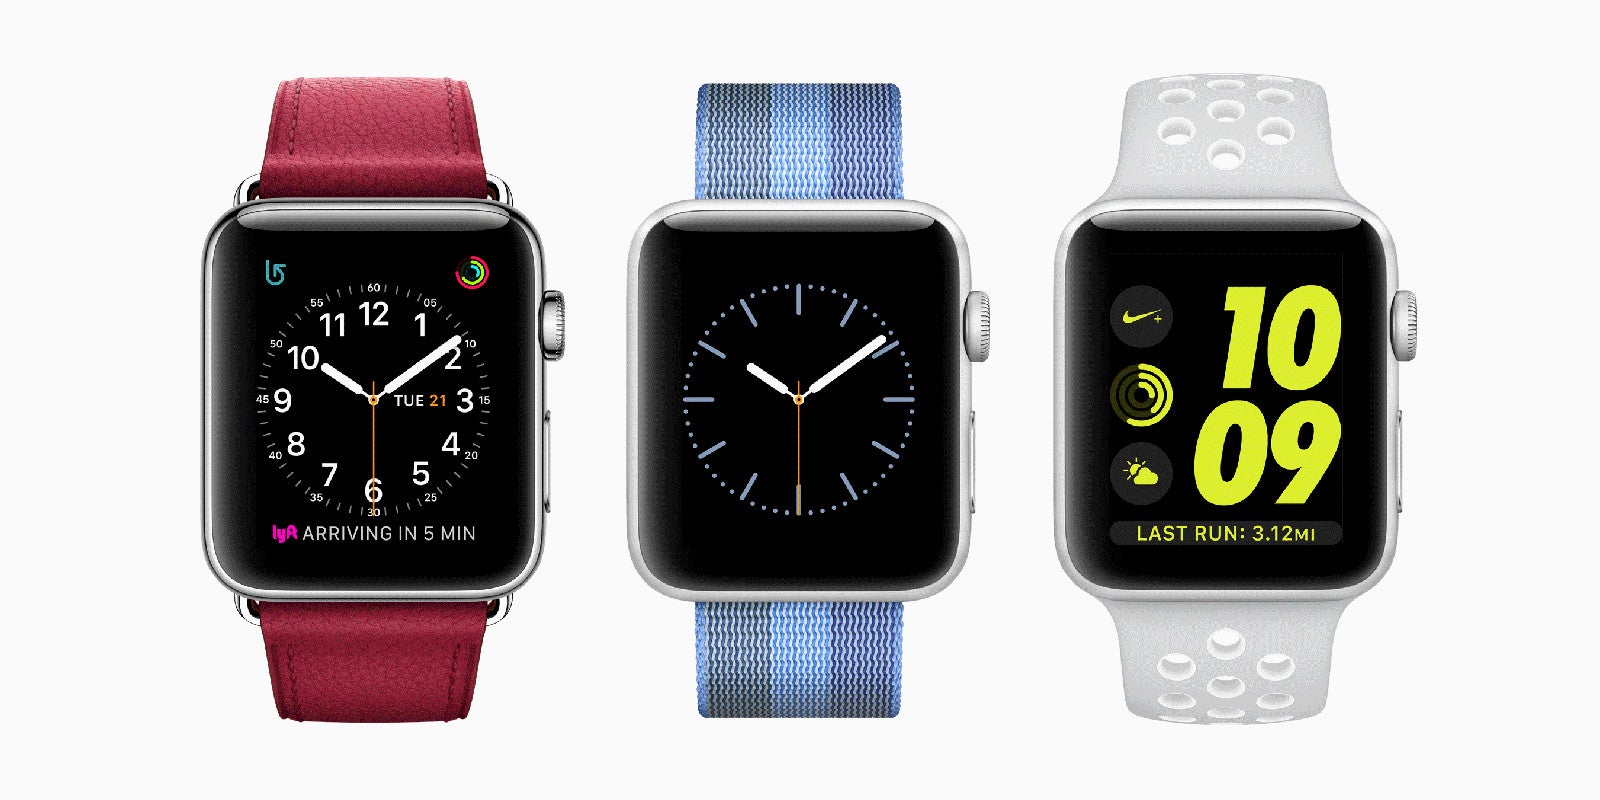 Apple just announced a ton of new straps for the Apple Watch